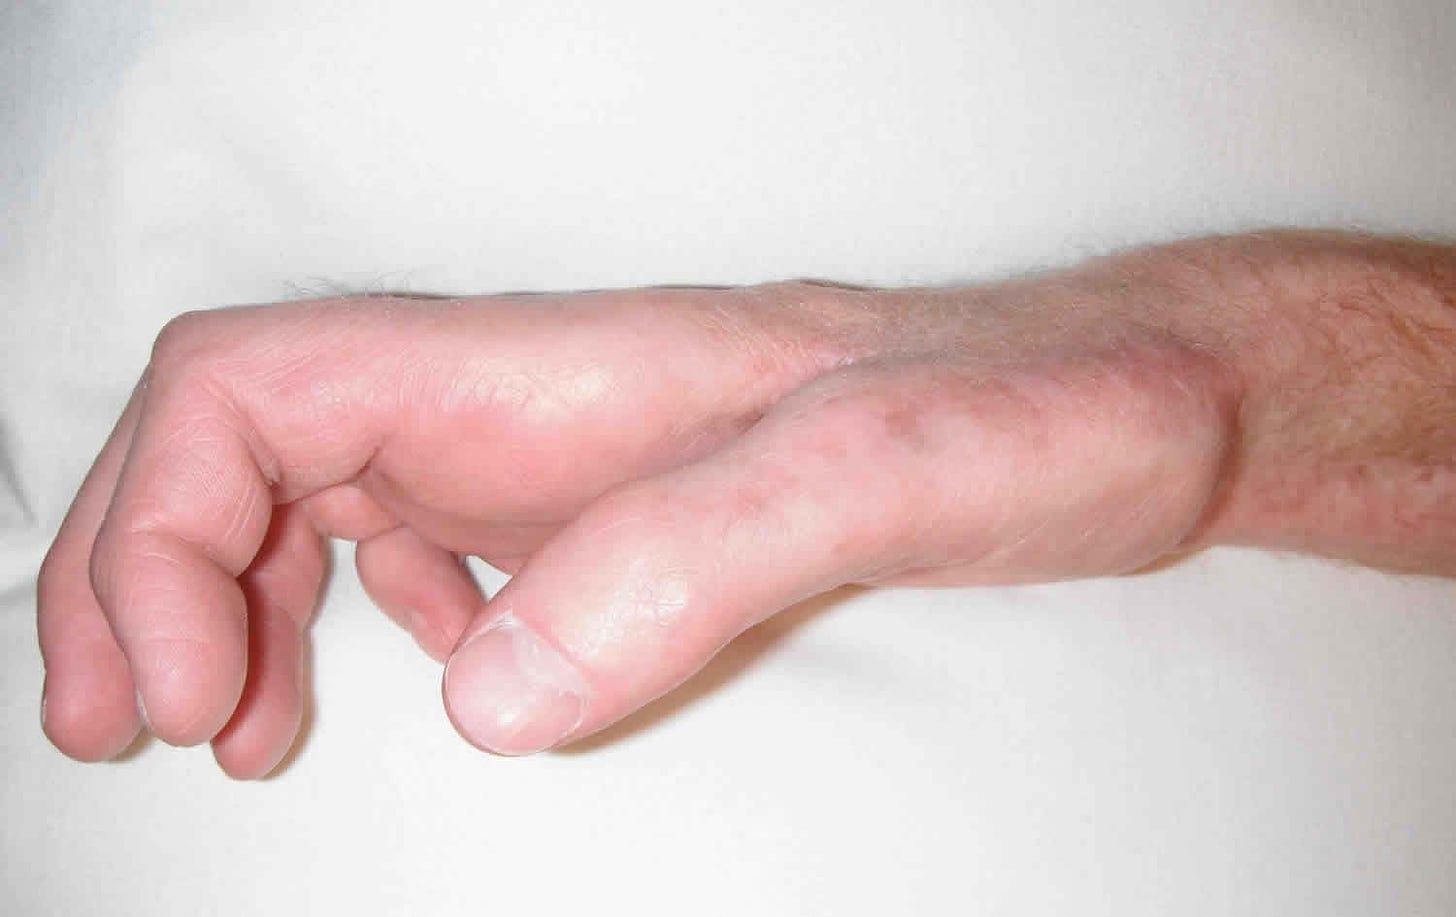 Claw hand causes, signs, symptoms, diagnosis and claw hand treatment